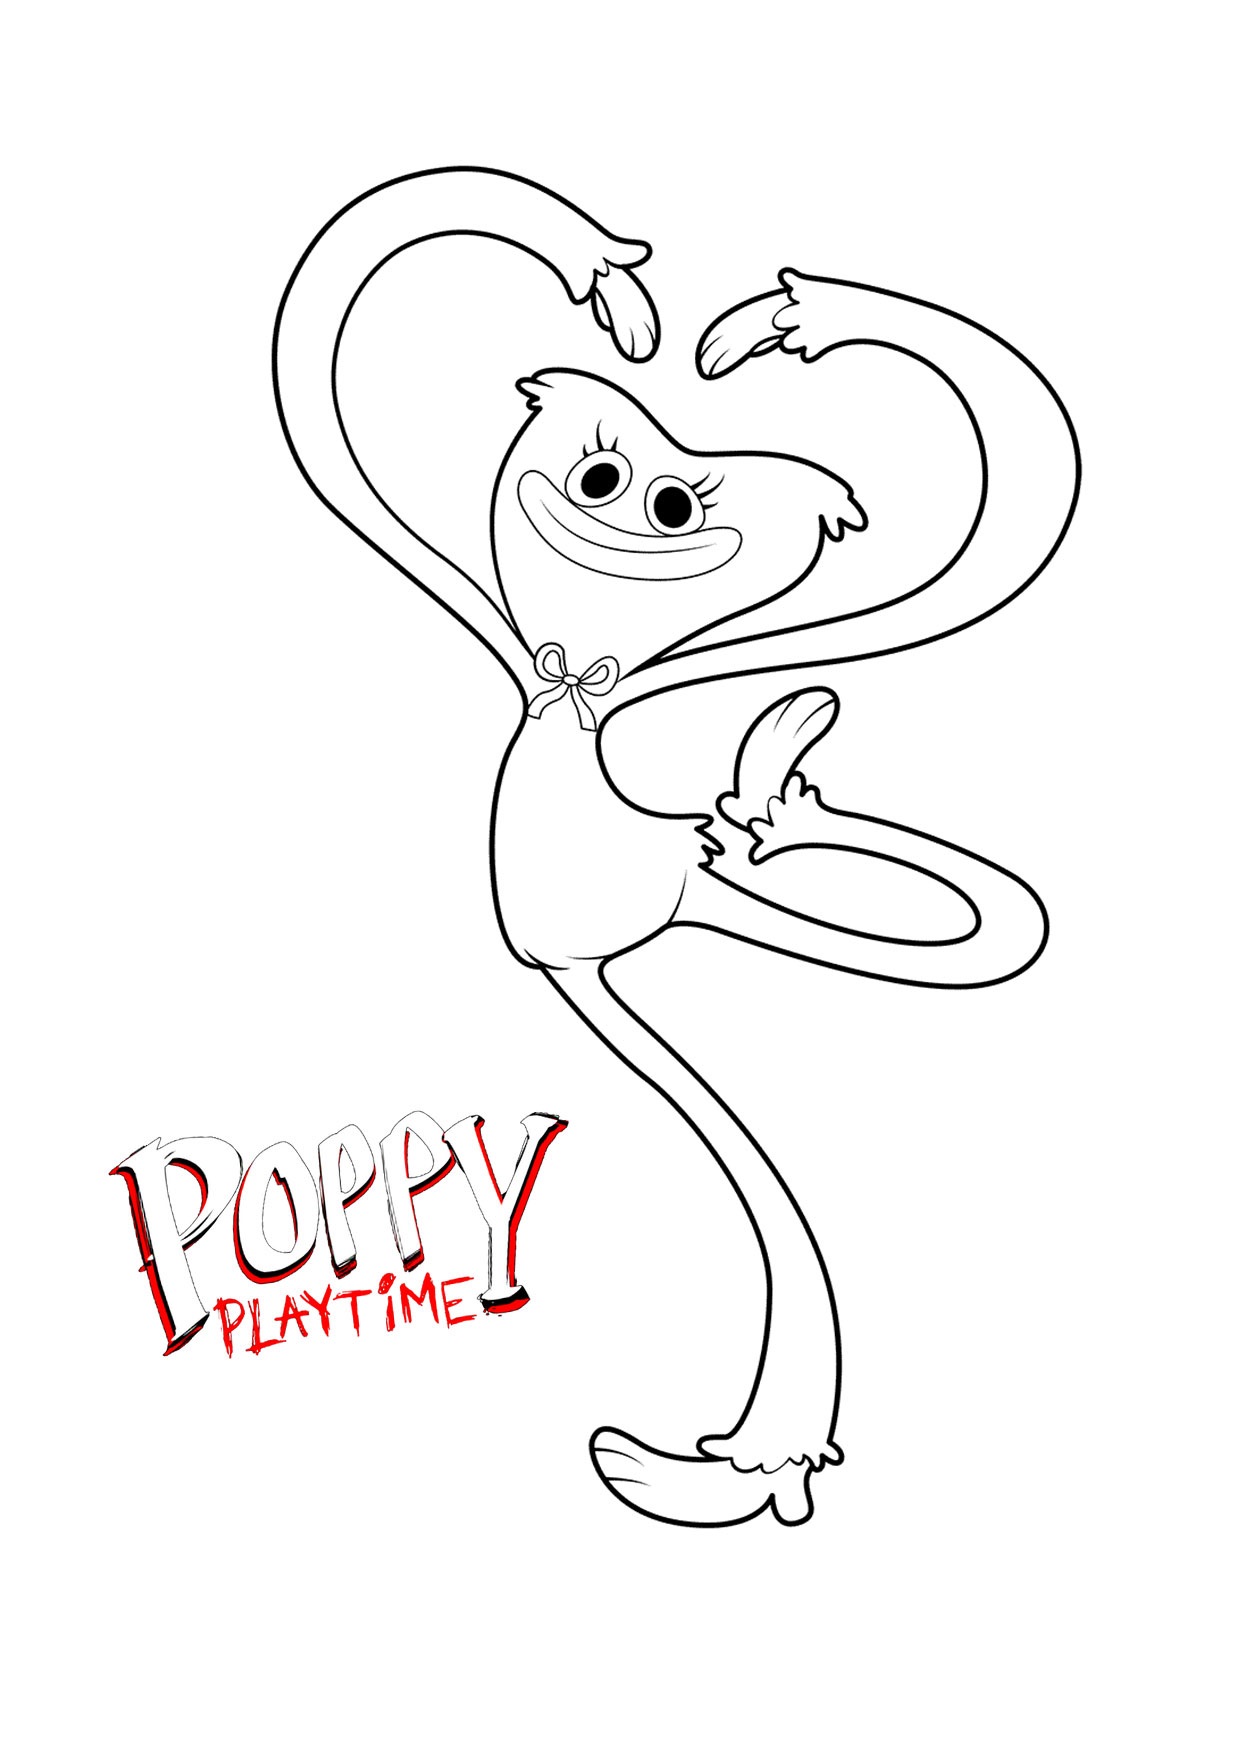 Kissy Missy dancing coloring page